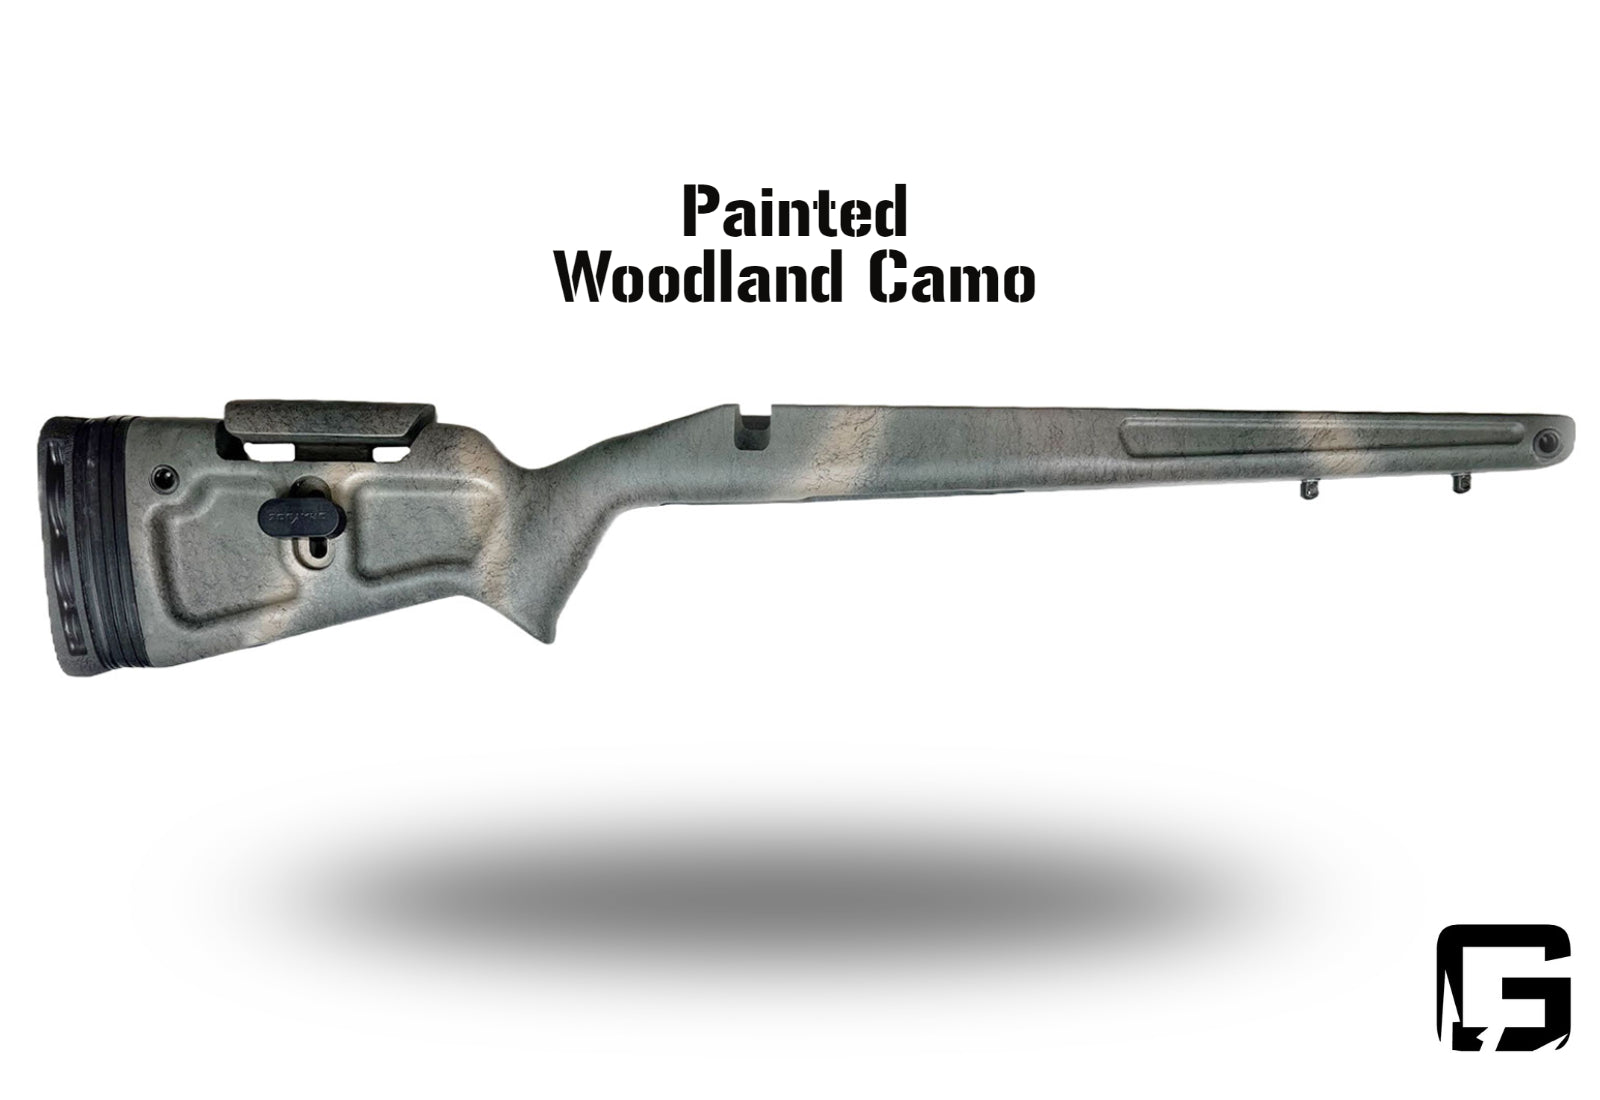 Eagle Pro - Right Hand Rem 700 or 700 clone Long Action, M5.  Painted Woodland Camo